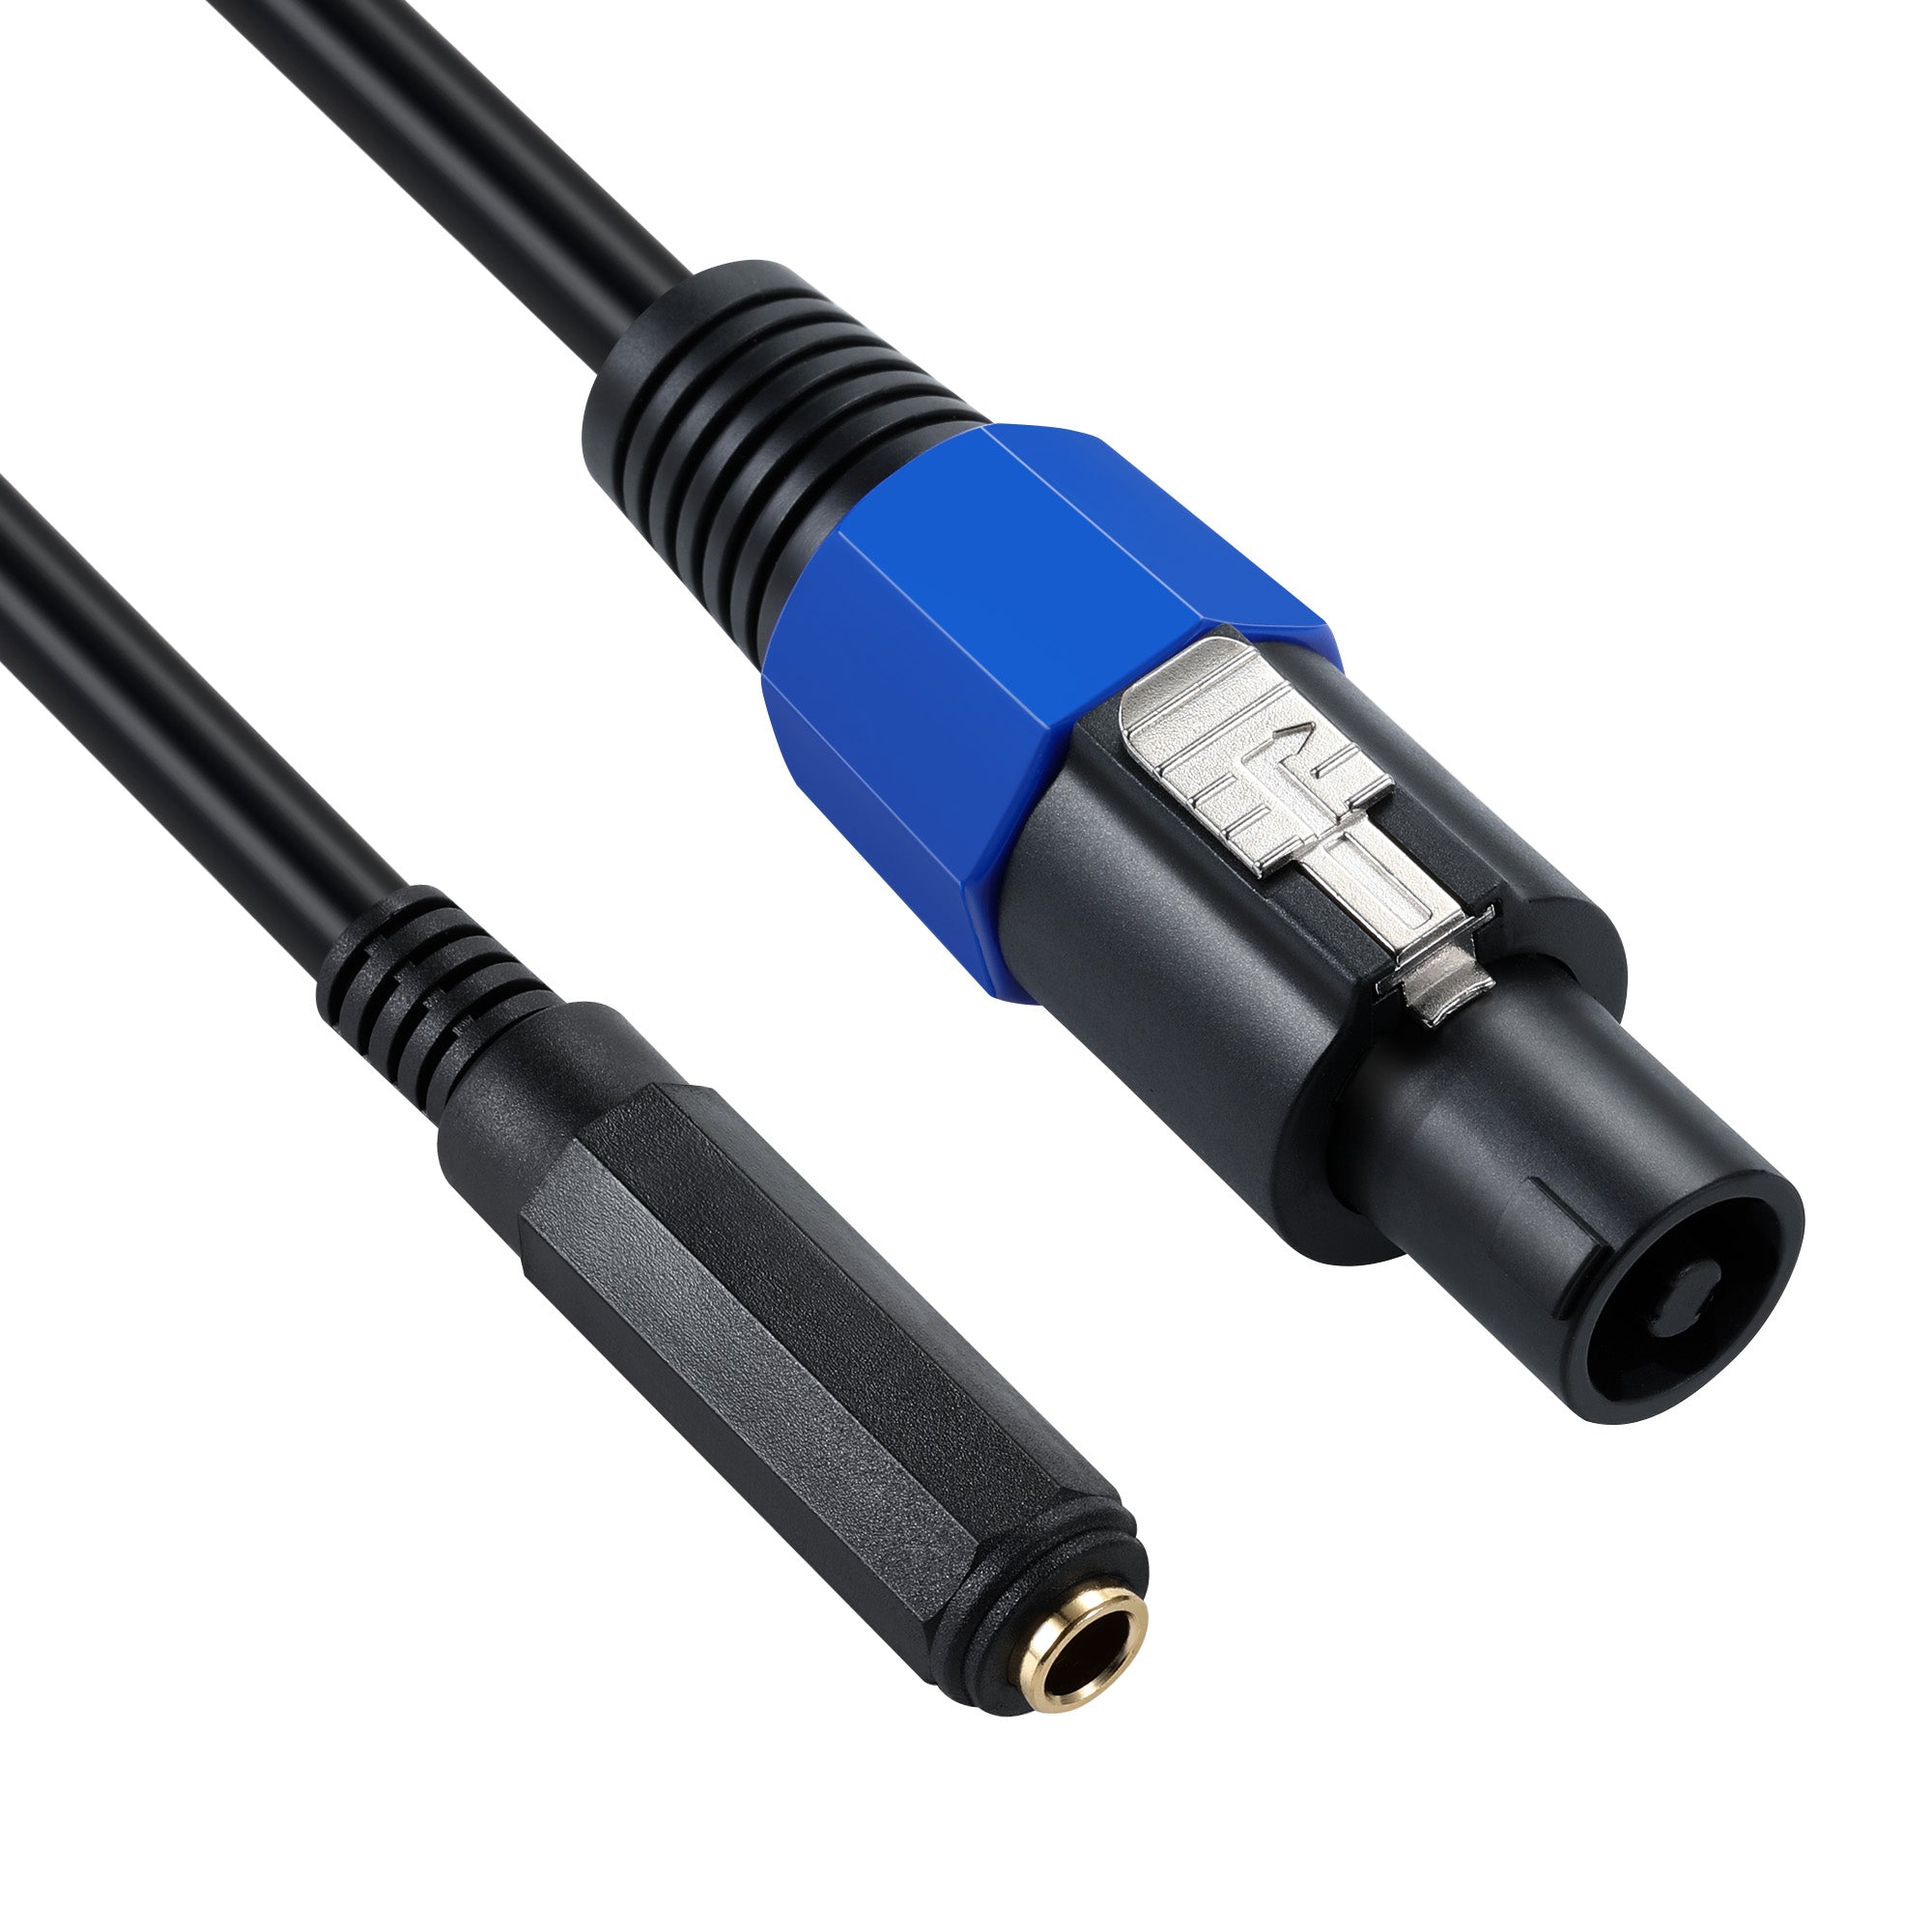 1/4" 6.35mm Female Speaker Cable with Twist Lock 0.5m